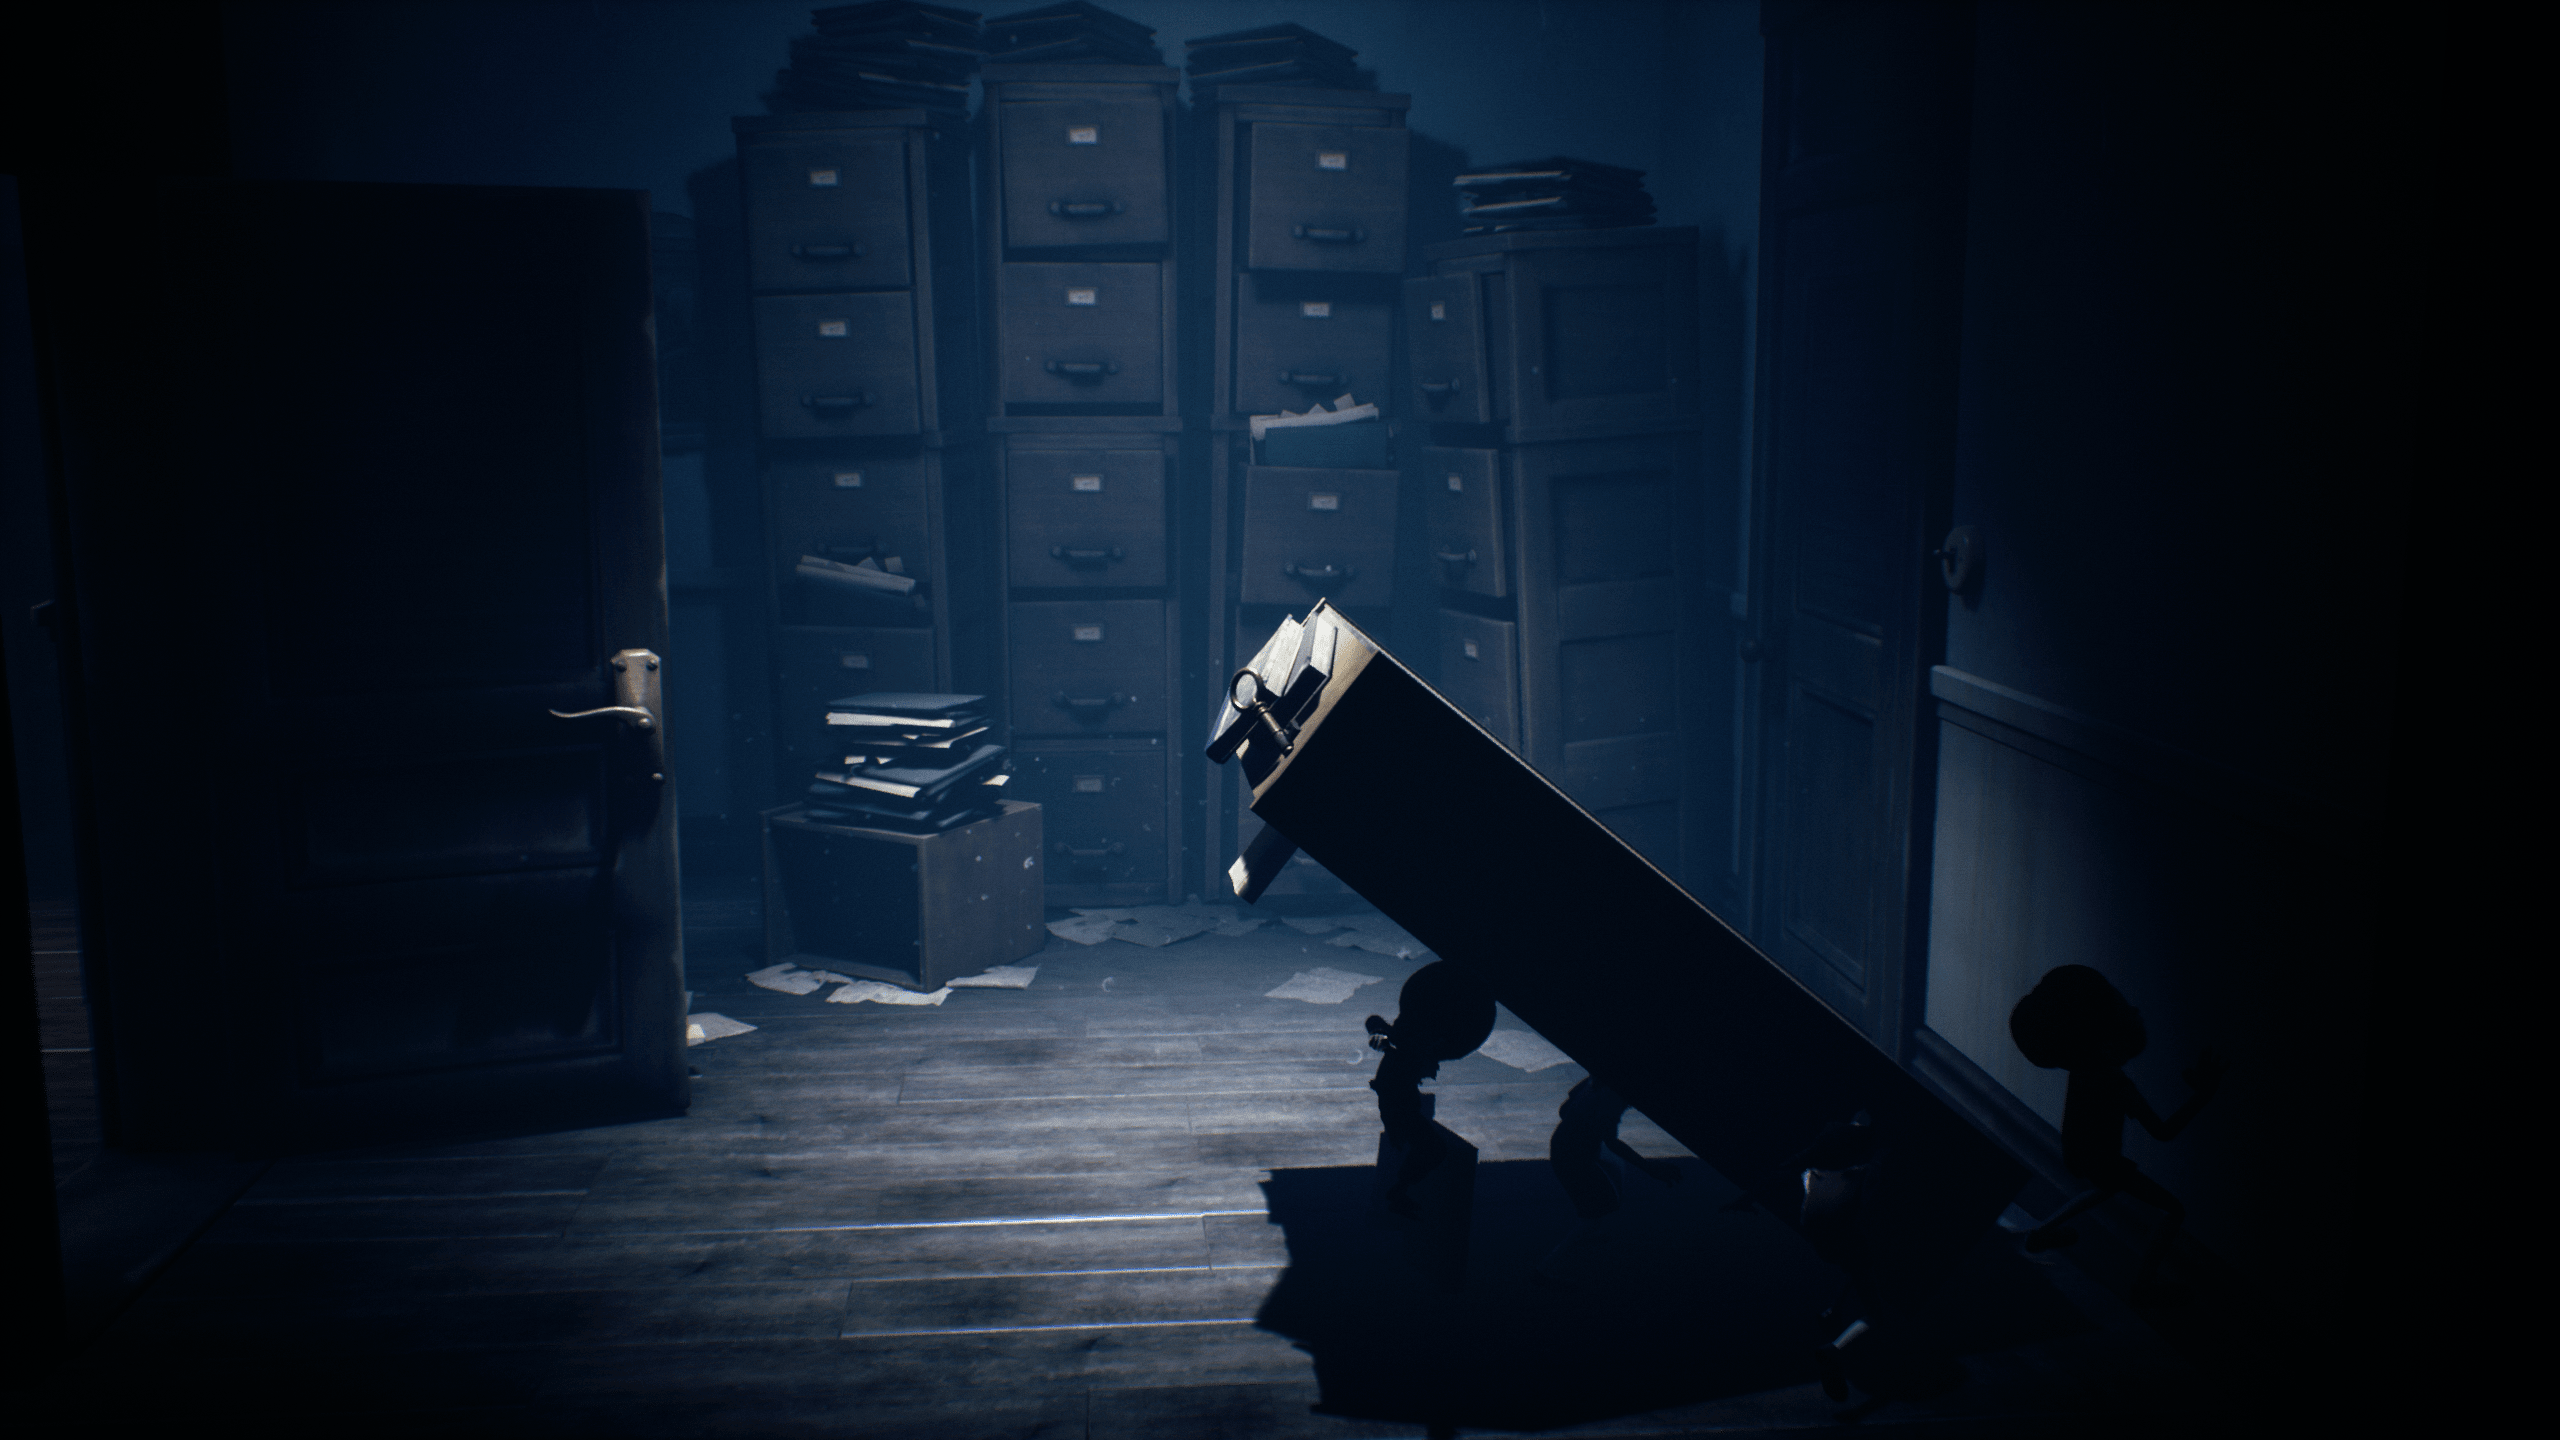 Little Nightmares II - All achievements and collectibles in chronological order